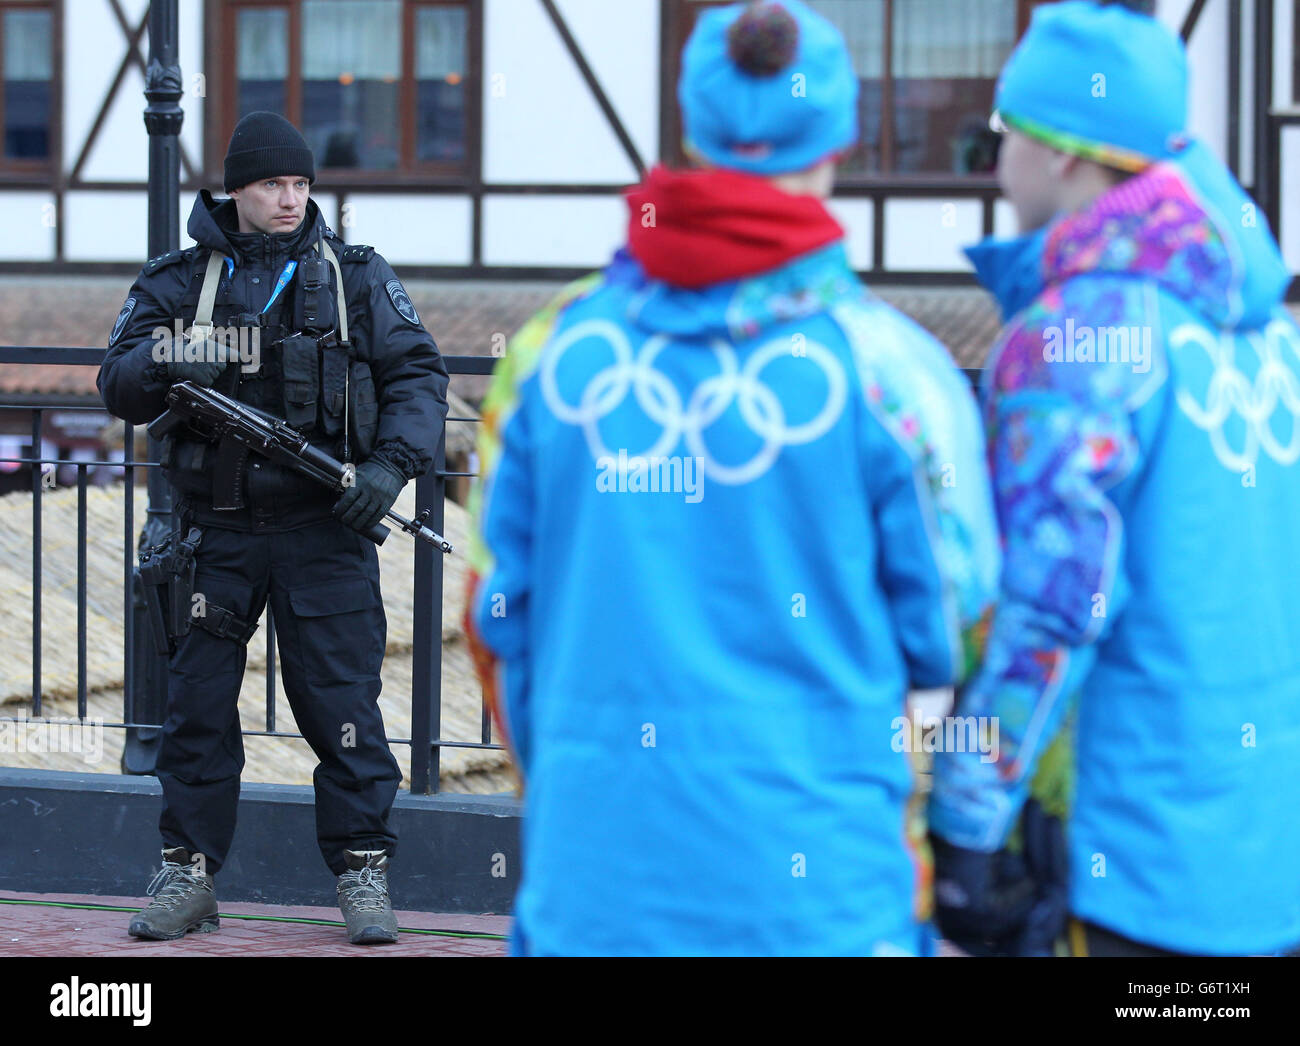 Sochi Winter Olympic Games - Pre-Games activity - Wednesday. Security as The Olympic flame is carried through Rosa Khutor ahead of the start of 2014 Winter Games in Sochi. Stock Photo